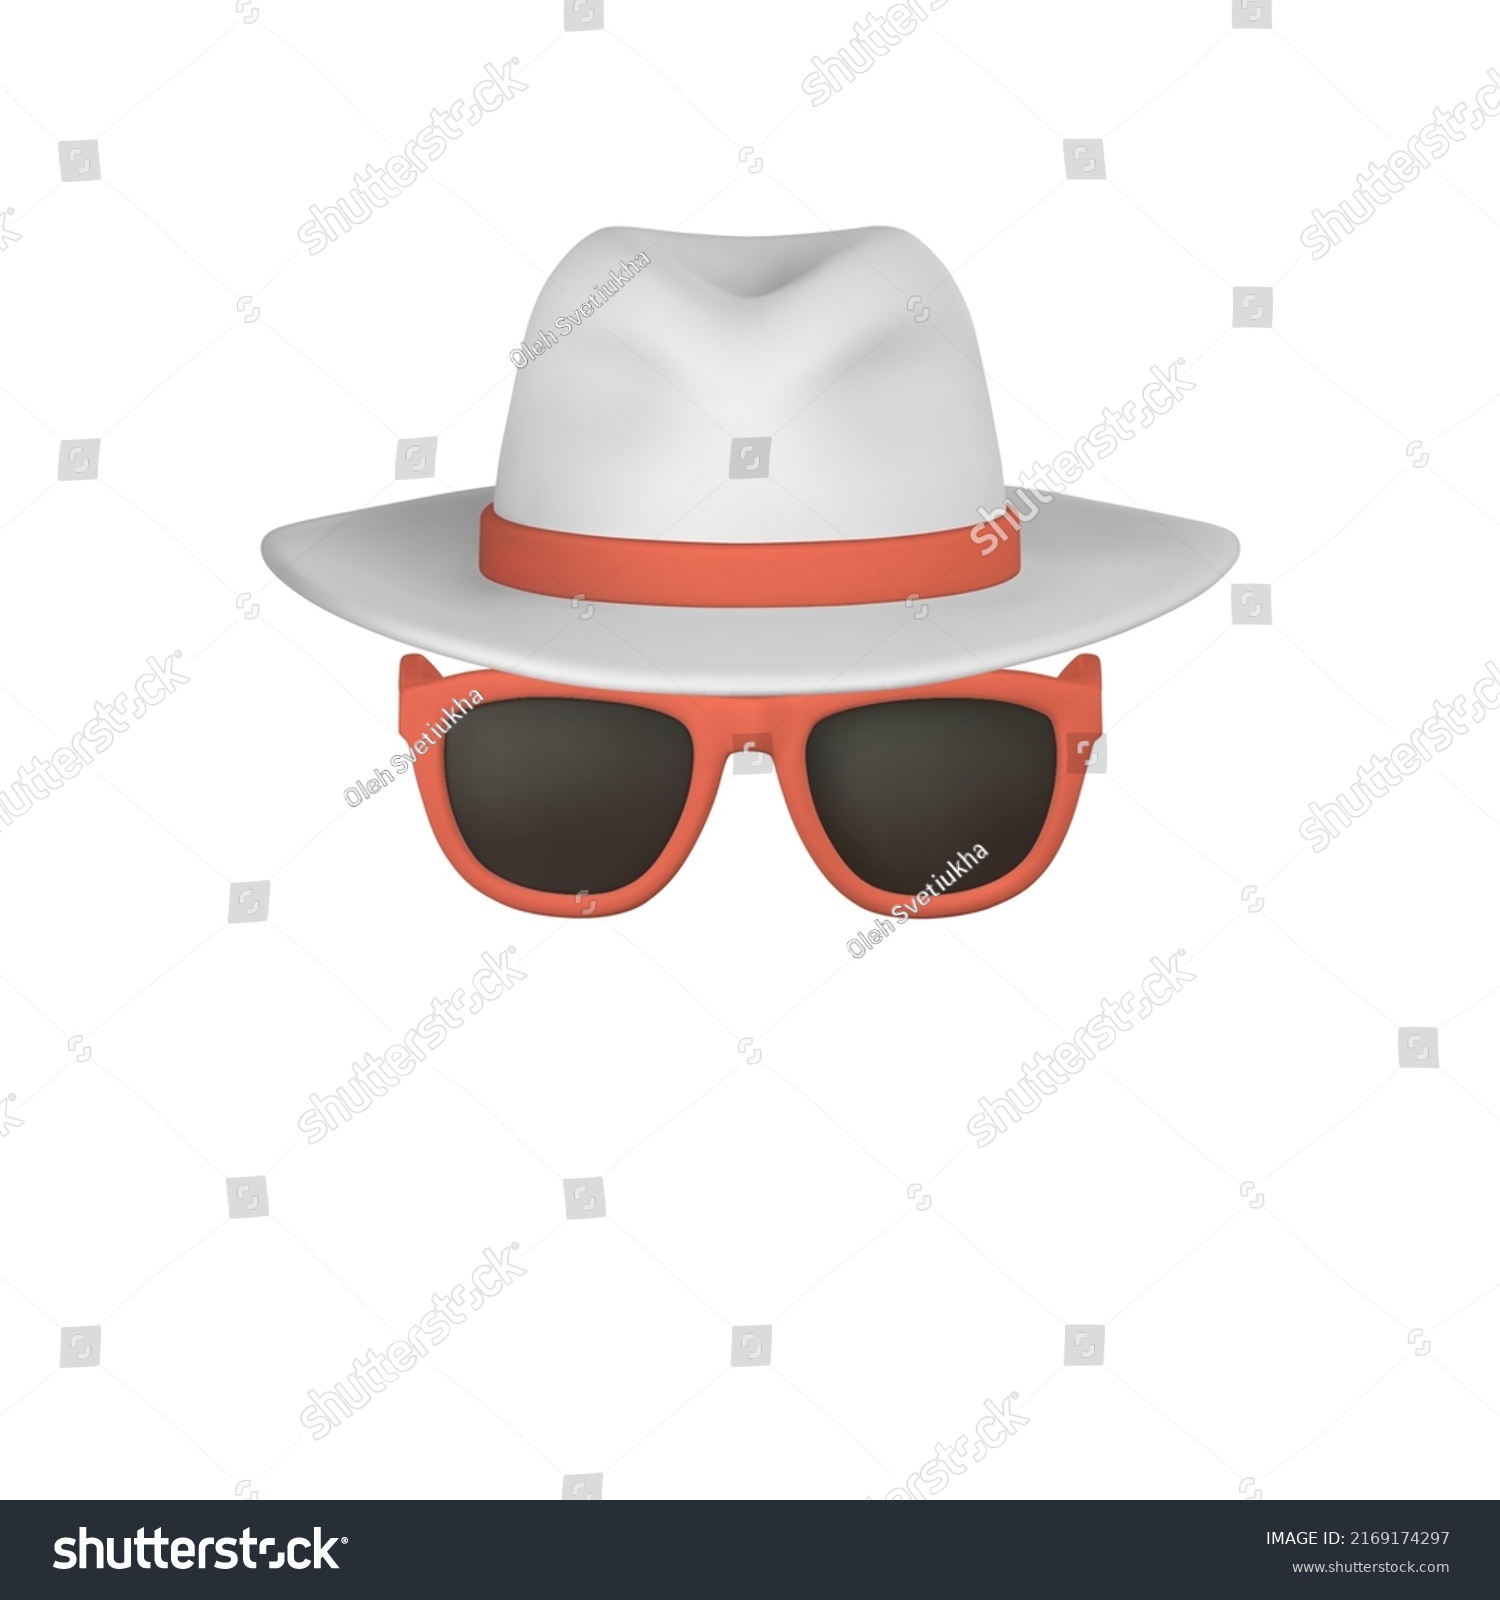 SVG of Realistic 3d mans hat and sunglasses  on white background. Summertime object. Vector illustration. svg